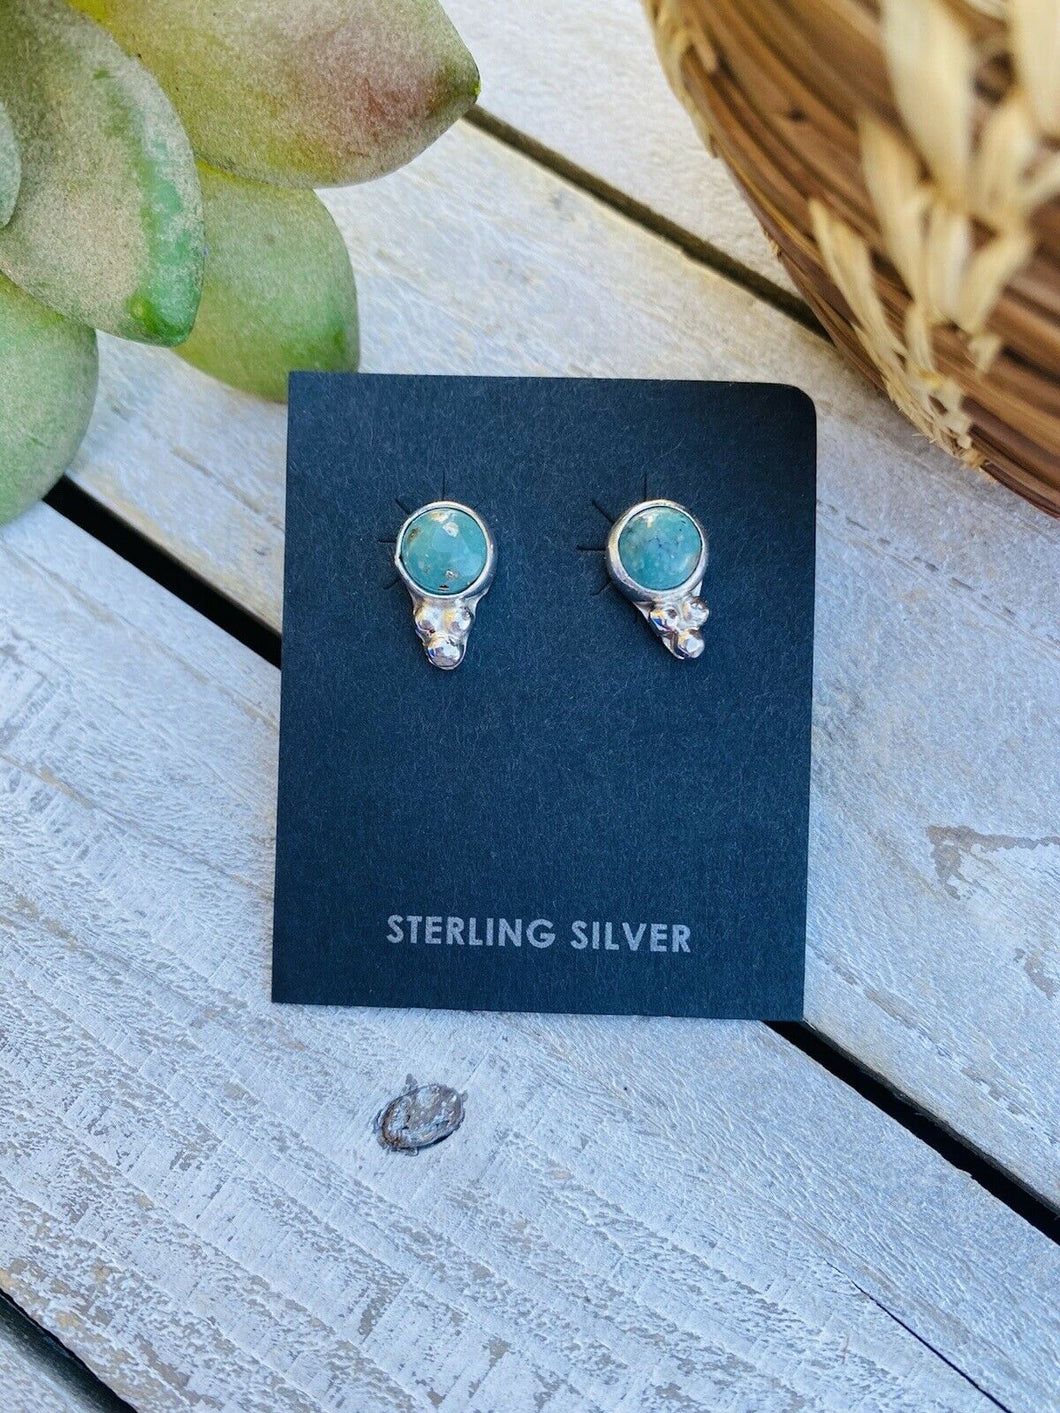 Navajo Sterling Silver And Turquoise Stud Earrings Signed